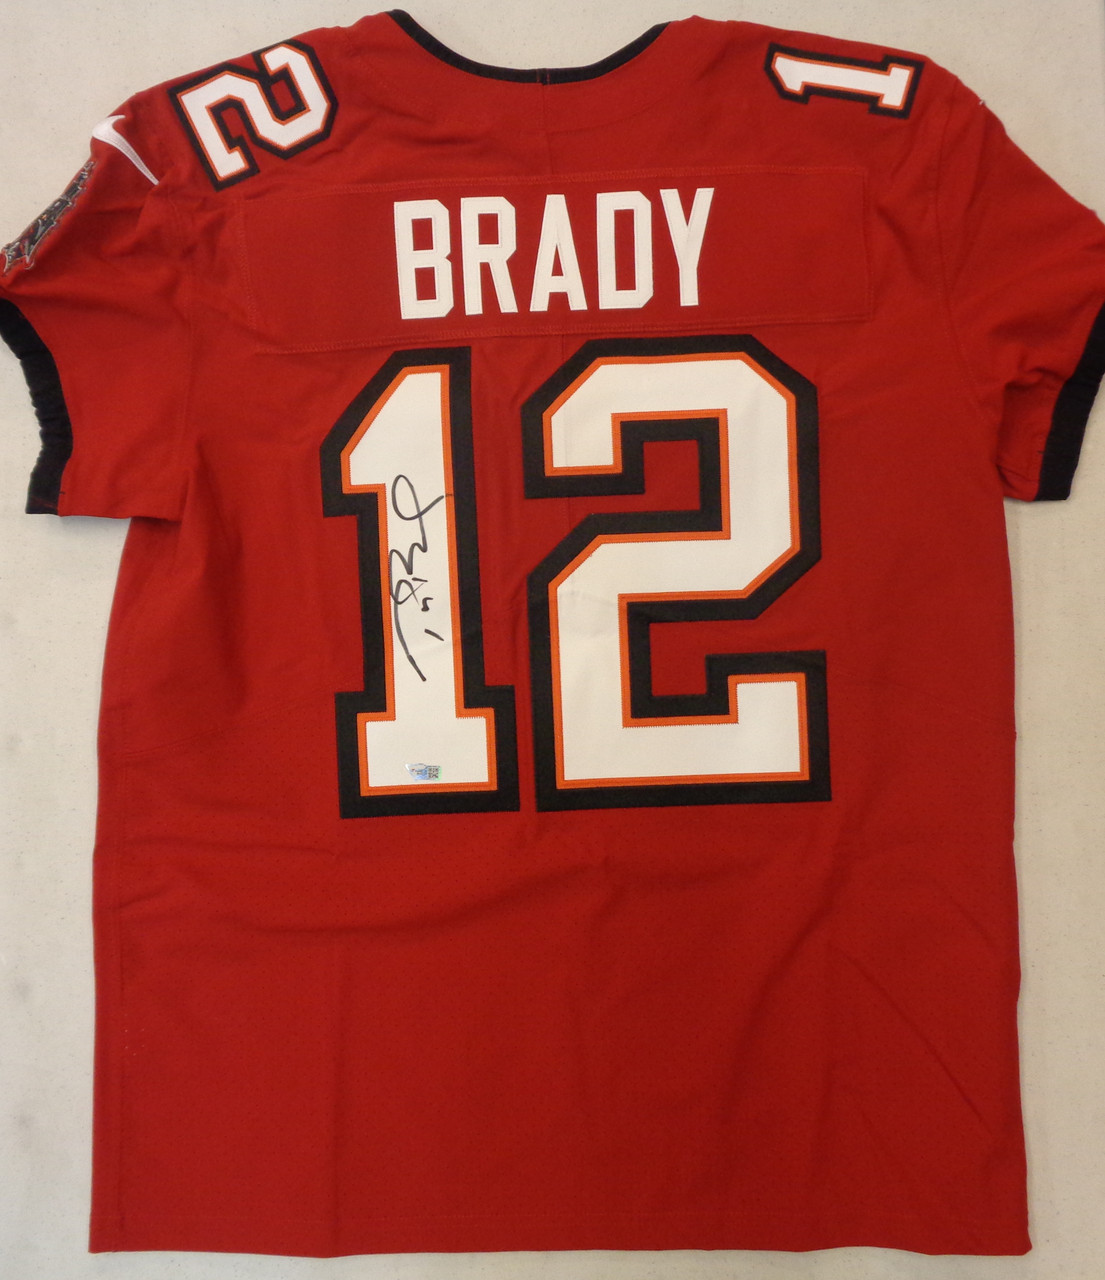 Tom Brady Autographed Tampa Bay Buccaneers Nike Elite Jersey - Red